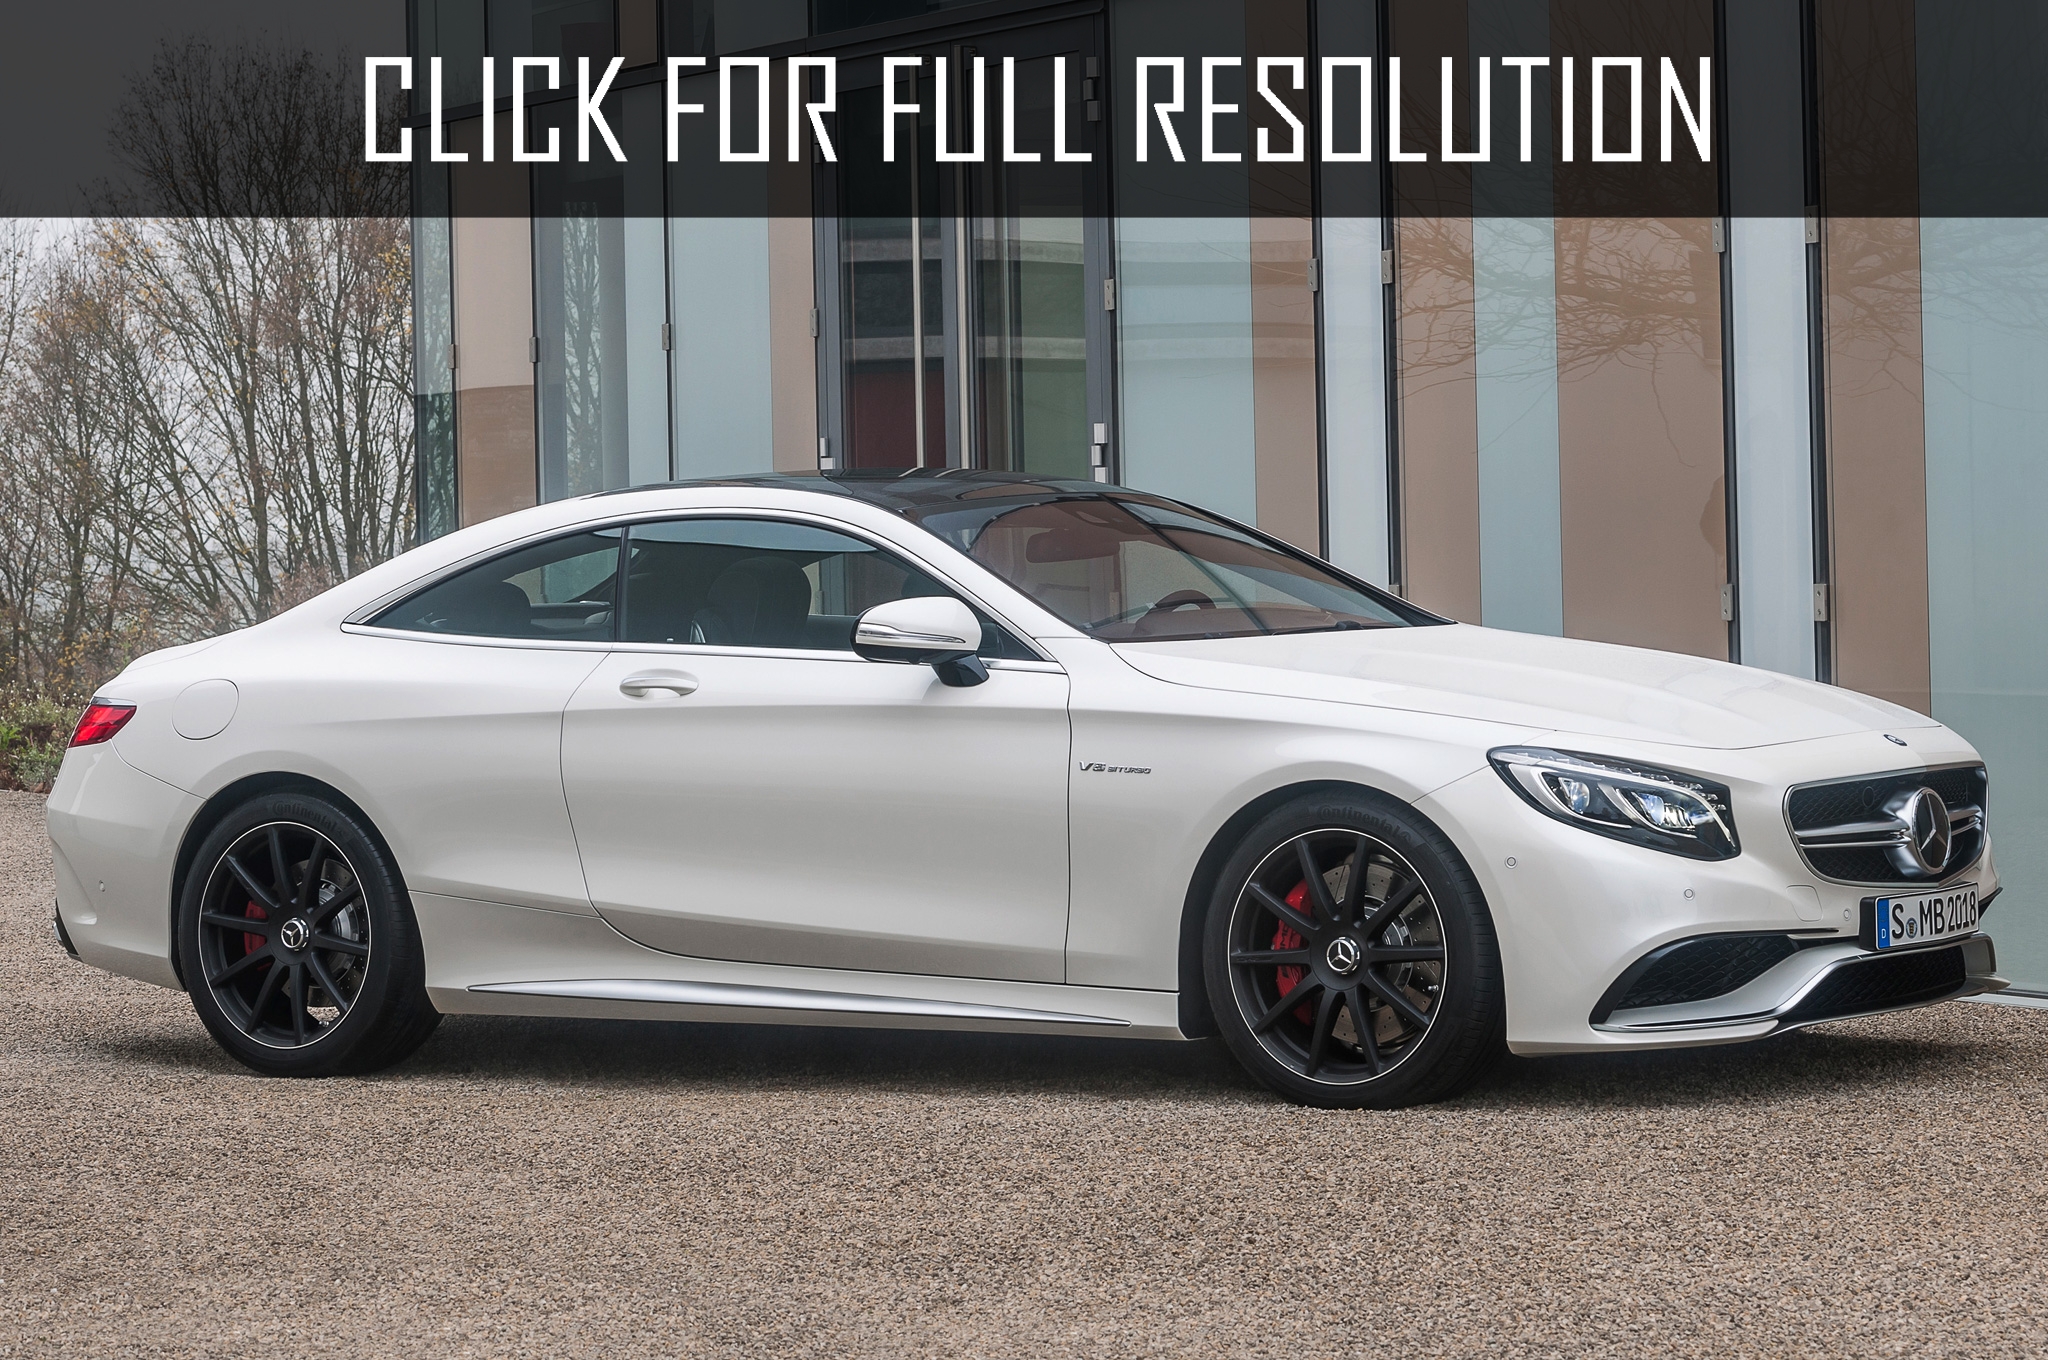 Mercedes Benz S550 Amg Coupe amazing photo gallery, some information